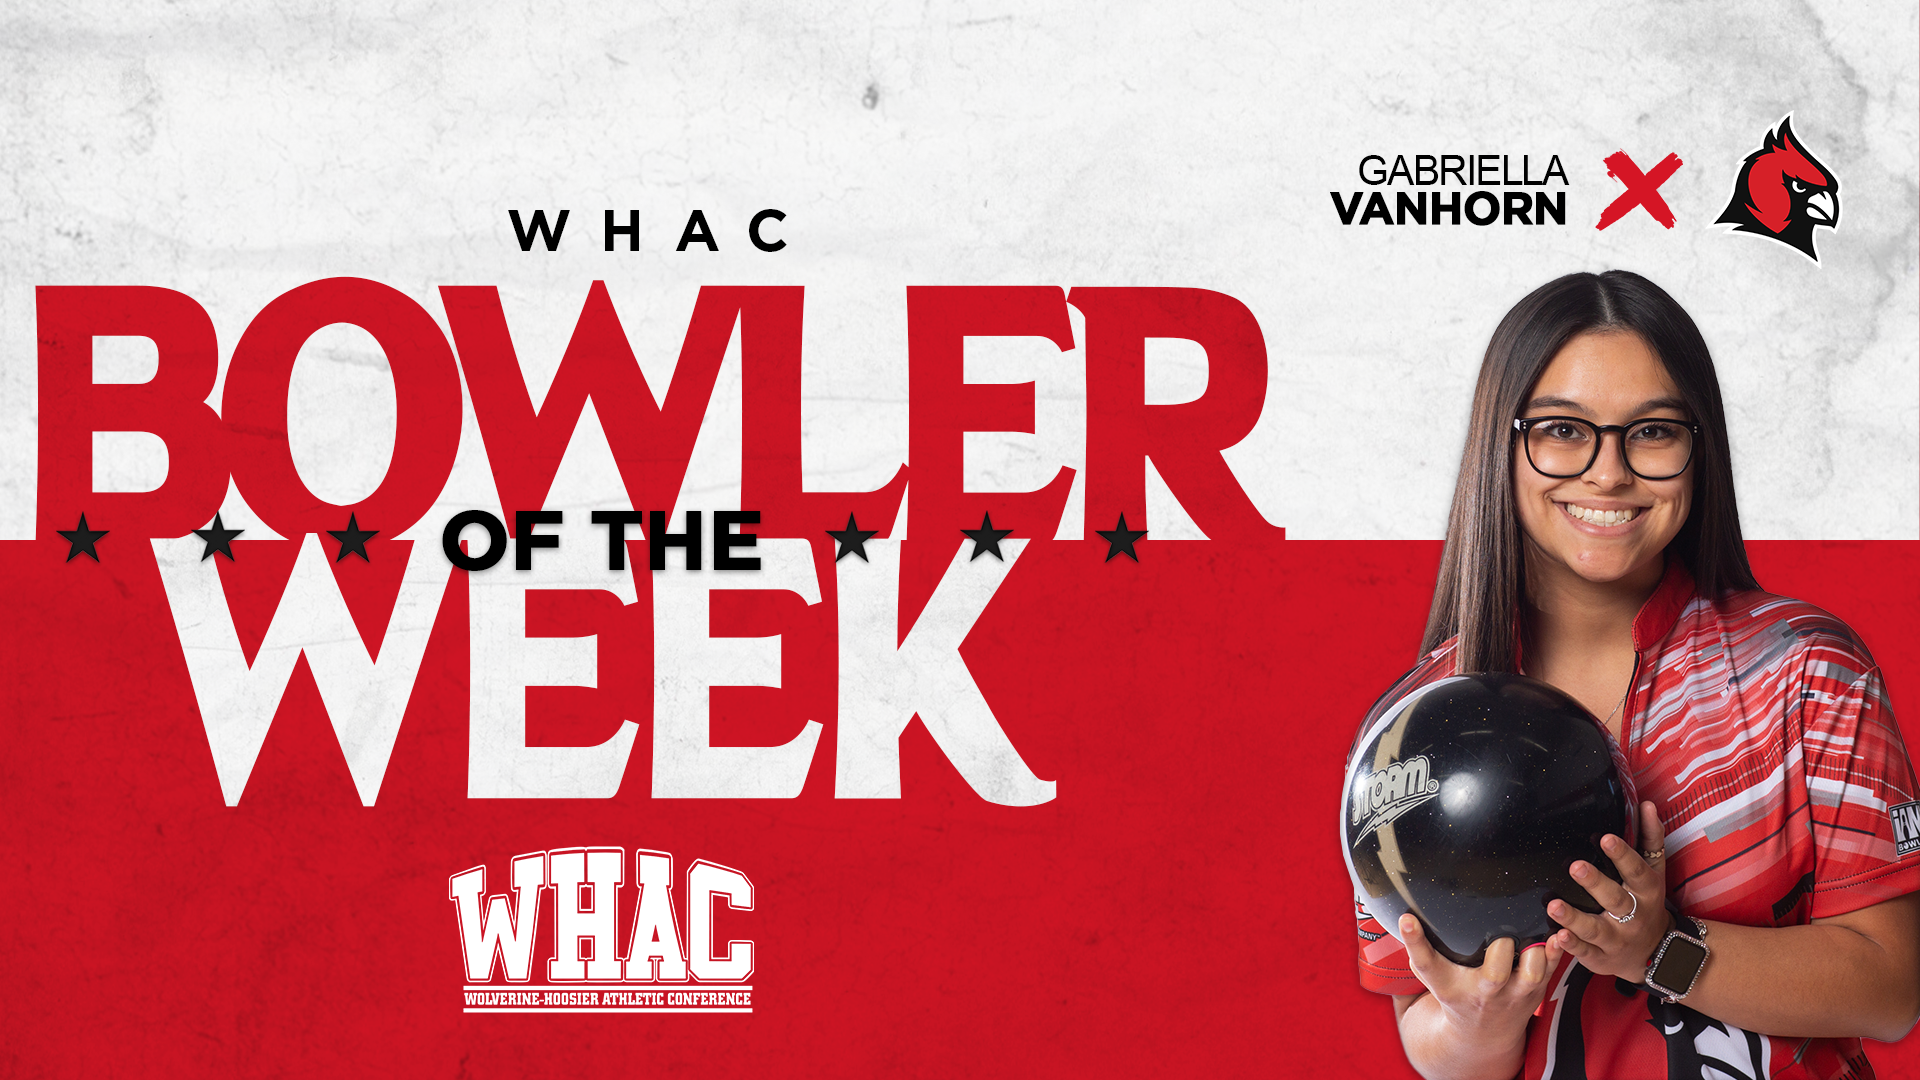 VanHorn earns fourth WHAC Bowler of the Week honors